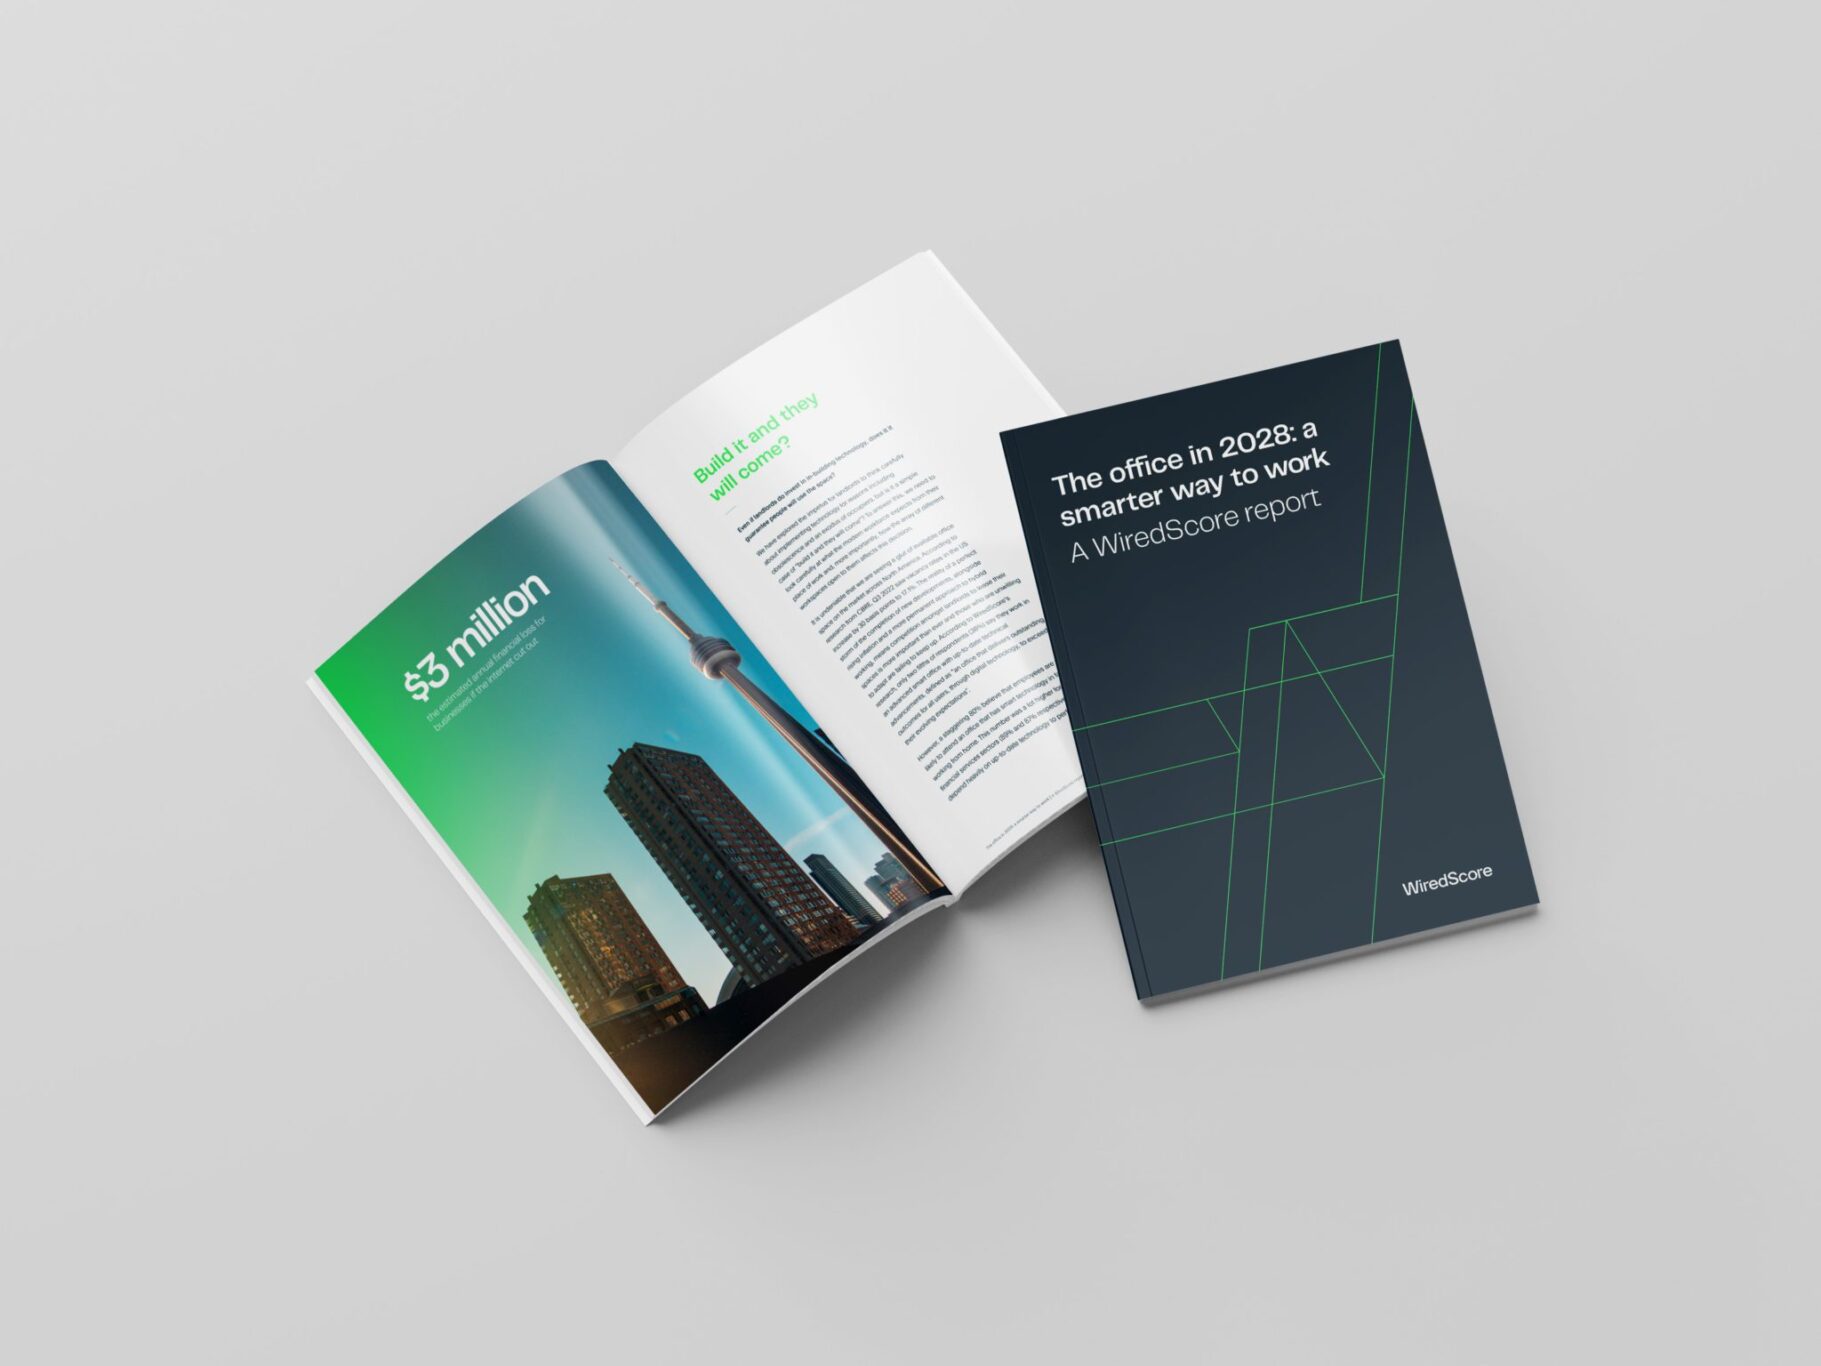 The front cover and inside spread of WiredScore's research report.